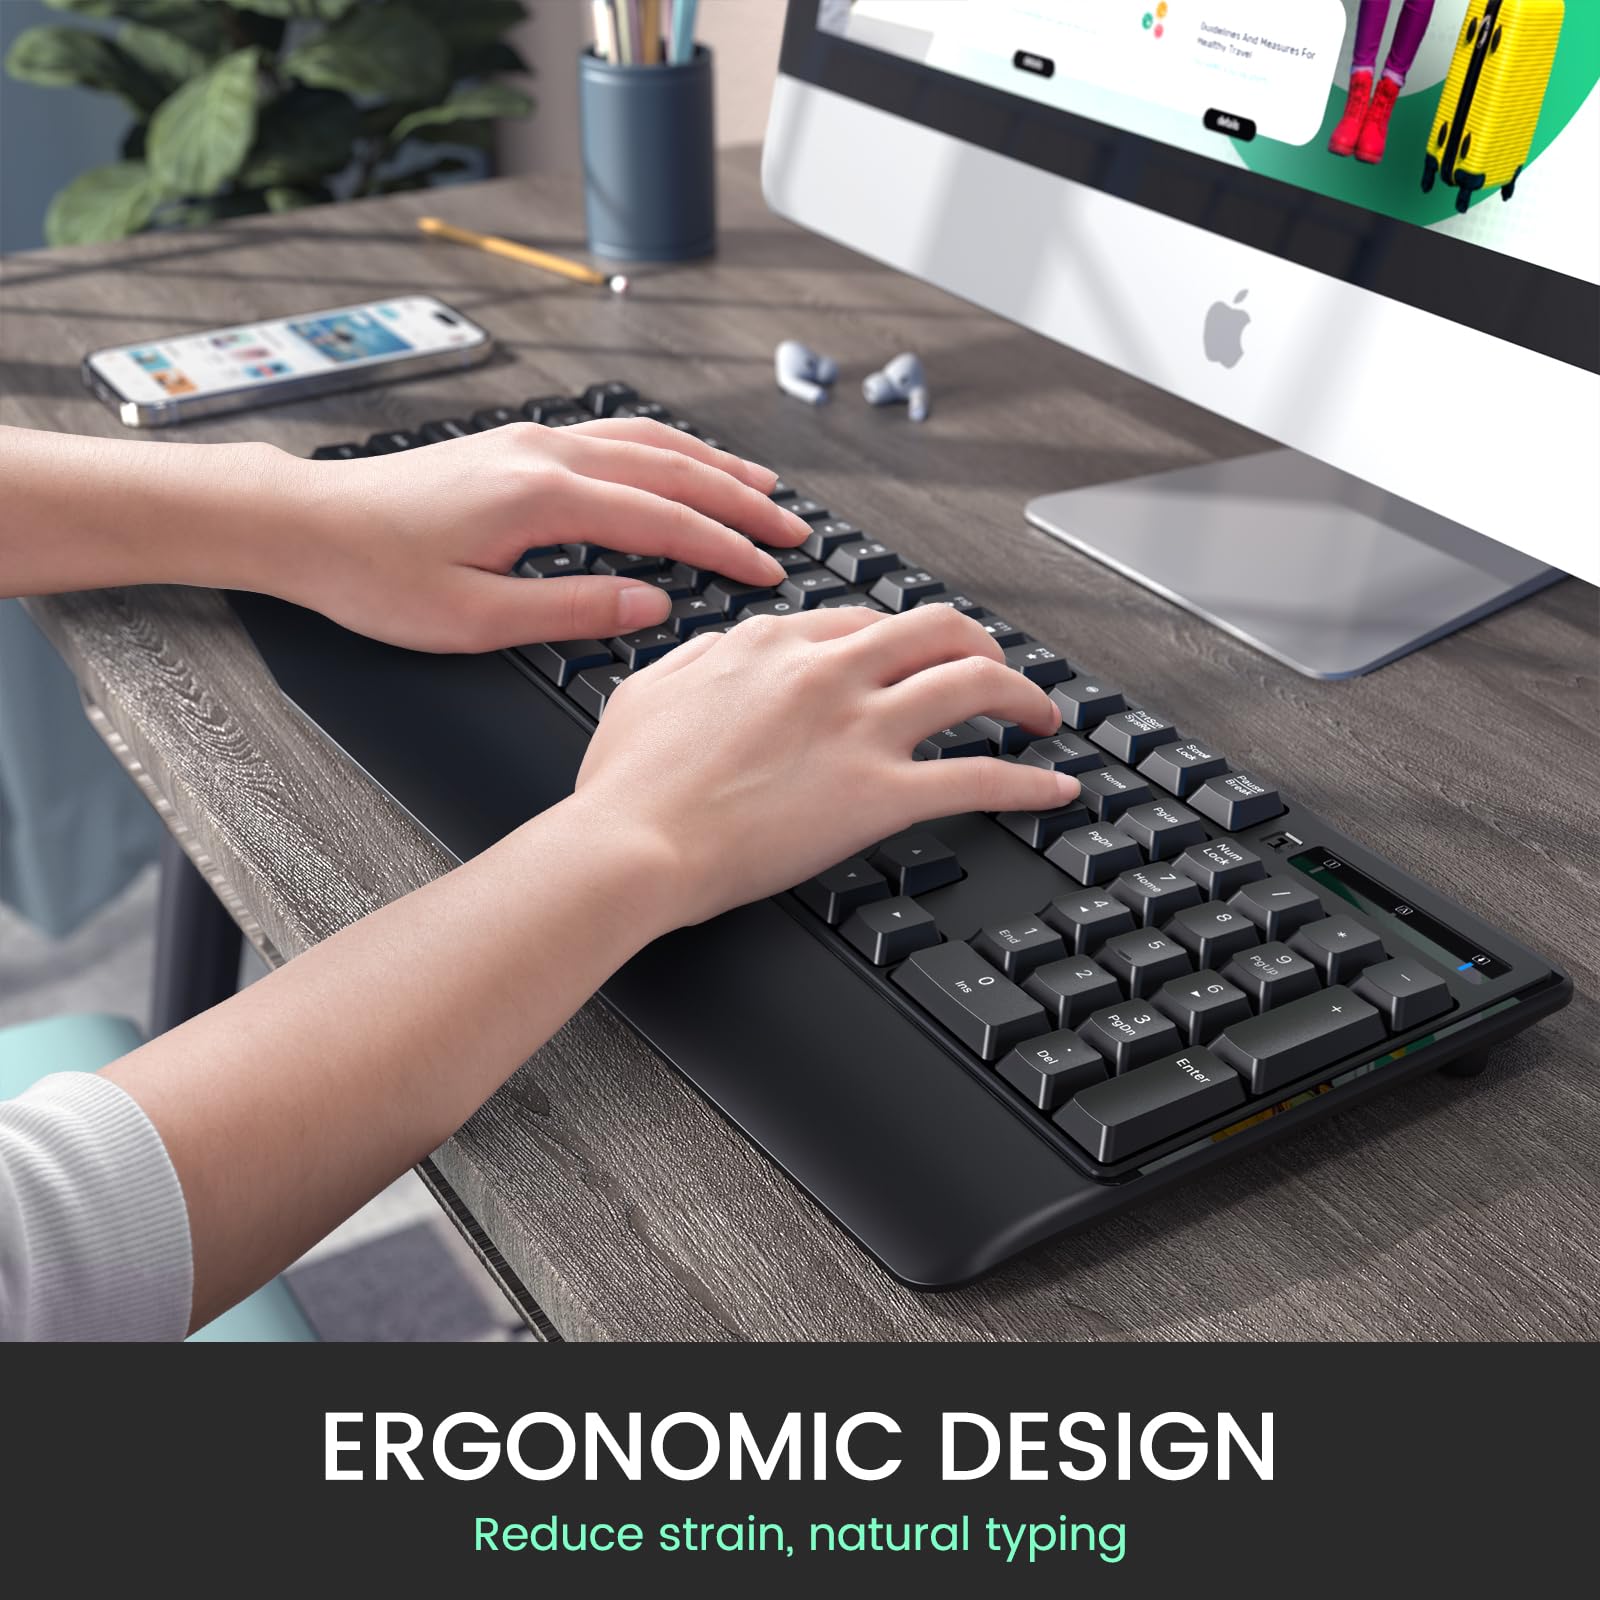 Wireless Keyboard and Mouse Combo, 2.4G Full-Sized Ergonomic Computer Keyboard with Wrist Rest and 3 Level DPI Adjustable Wireless Mouse for Windows/MacOS, Desktops/Laptops